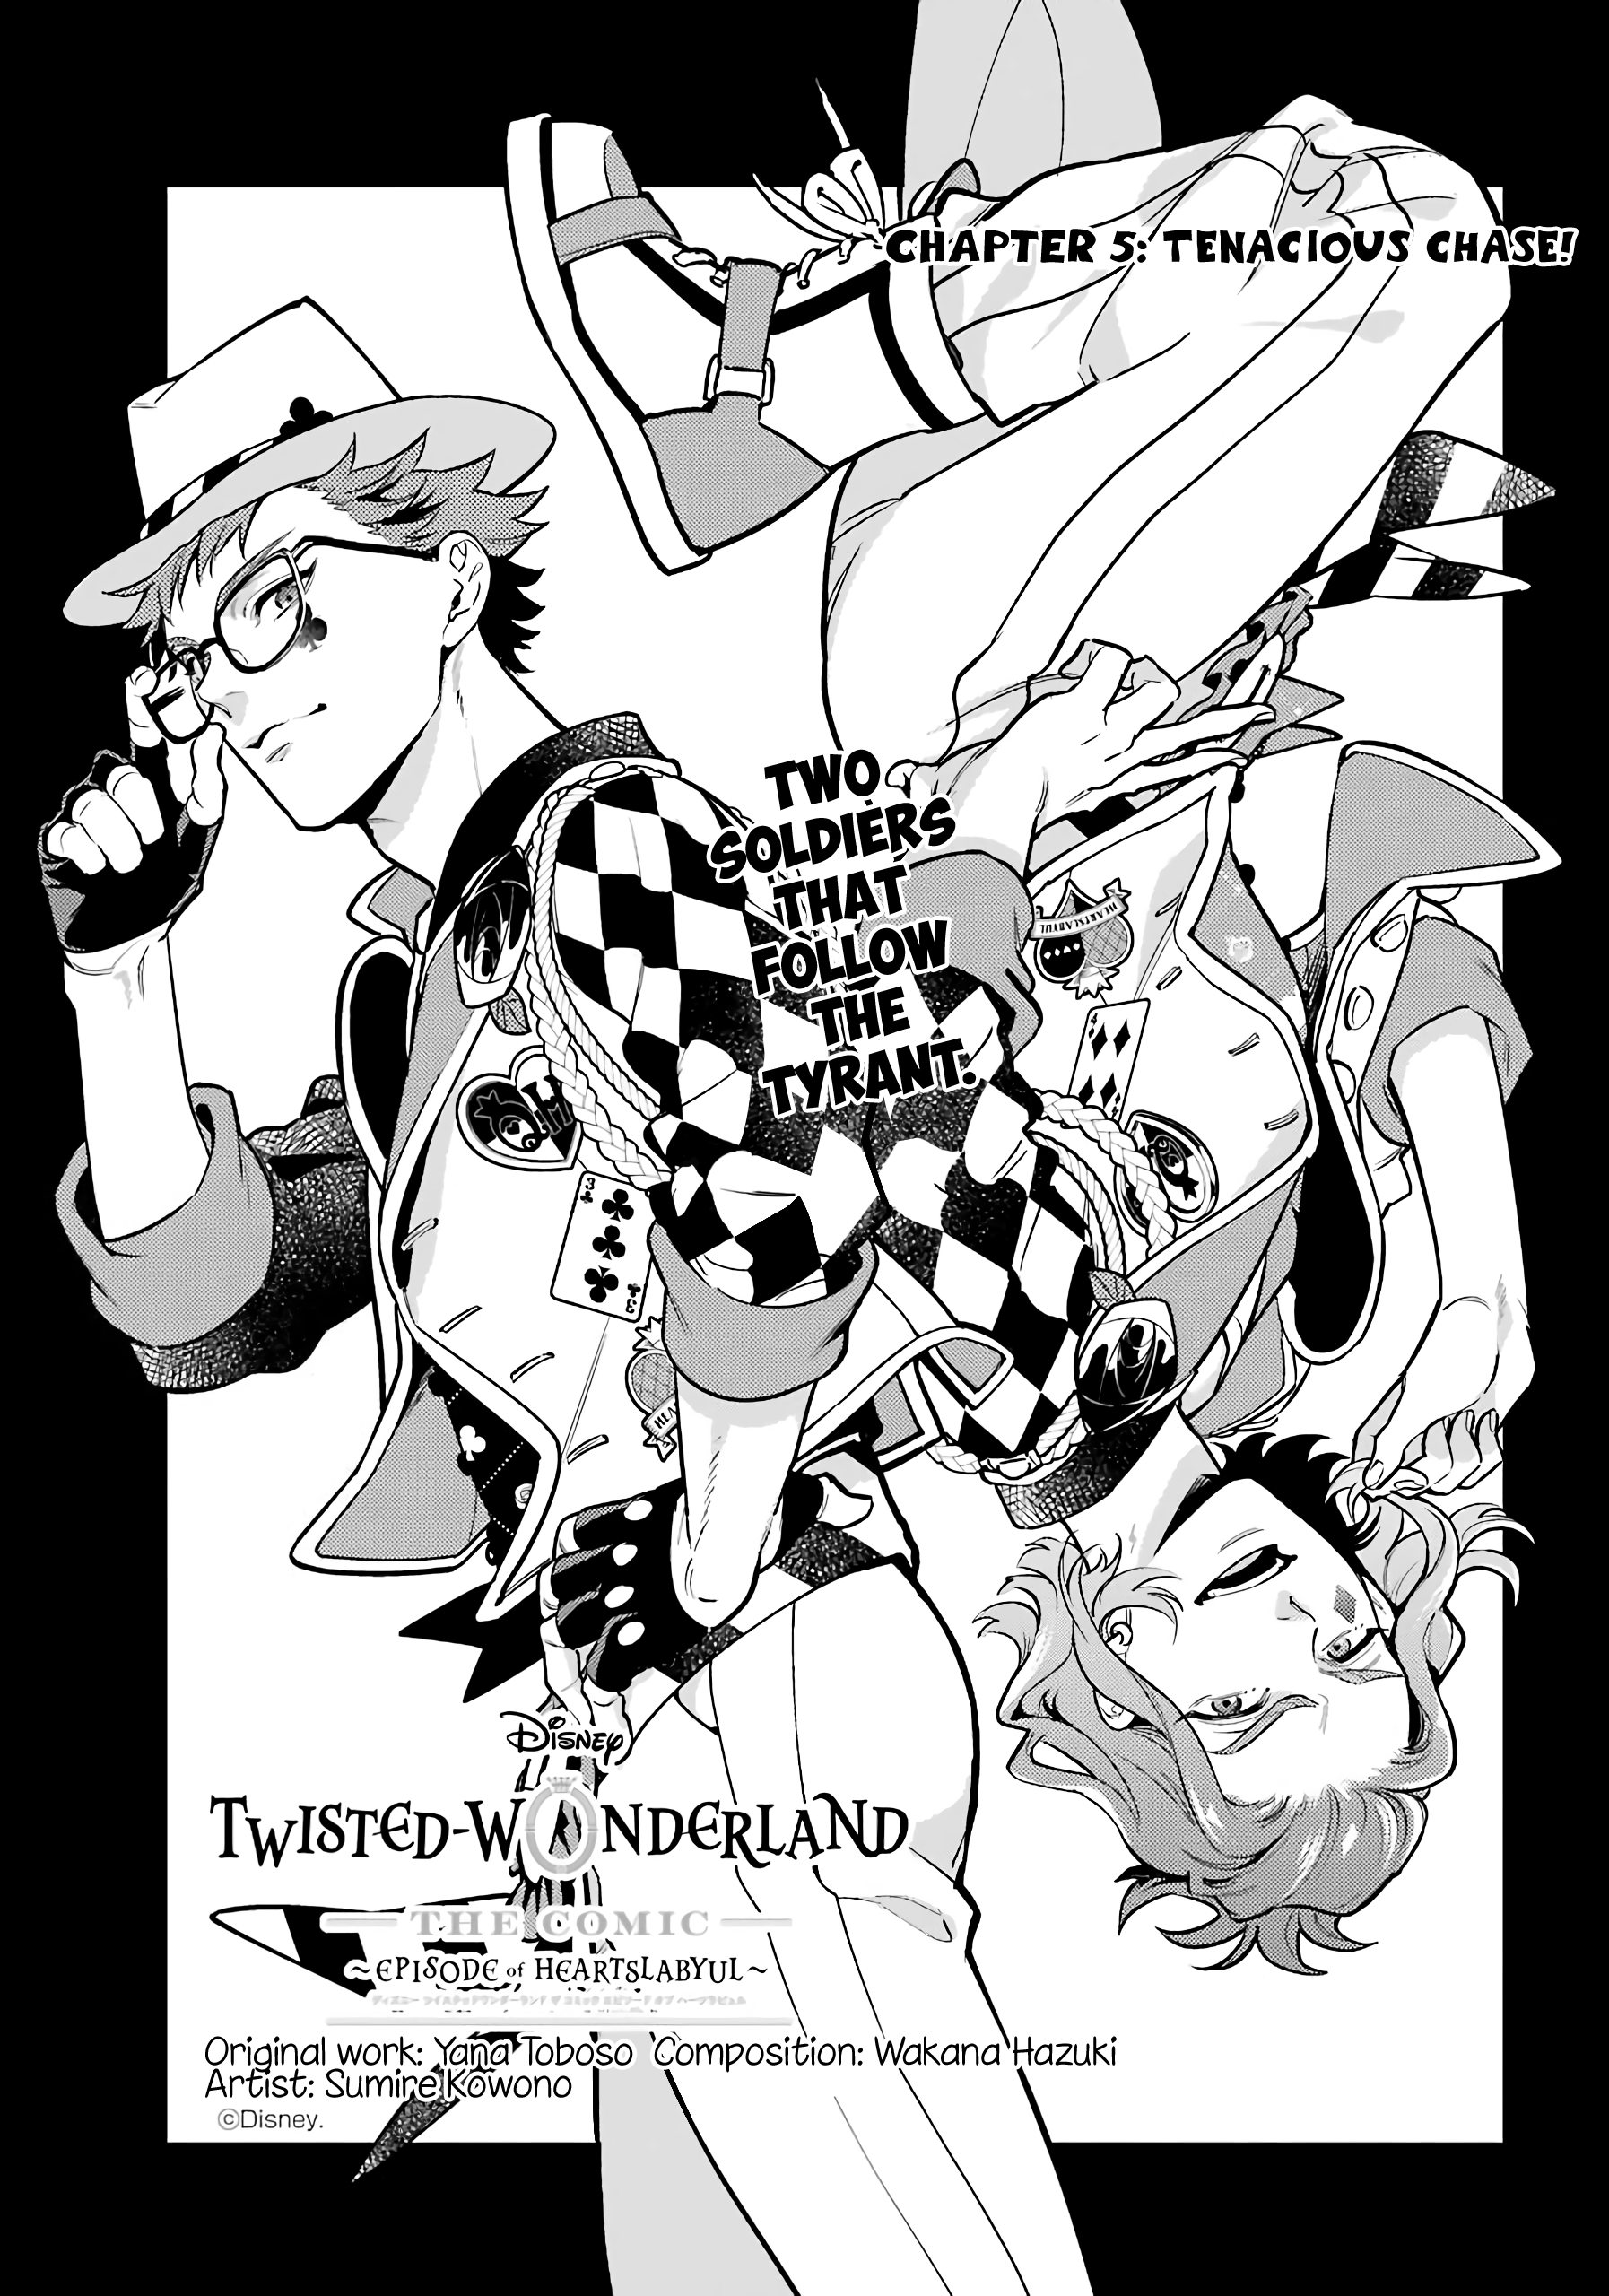 Disney Twisted Wonderland - The Comic - ~Episode Of Heartslabyul~ Vol.2 Chapter 5: Tenacious Chase! - Picture 1